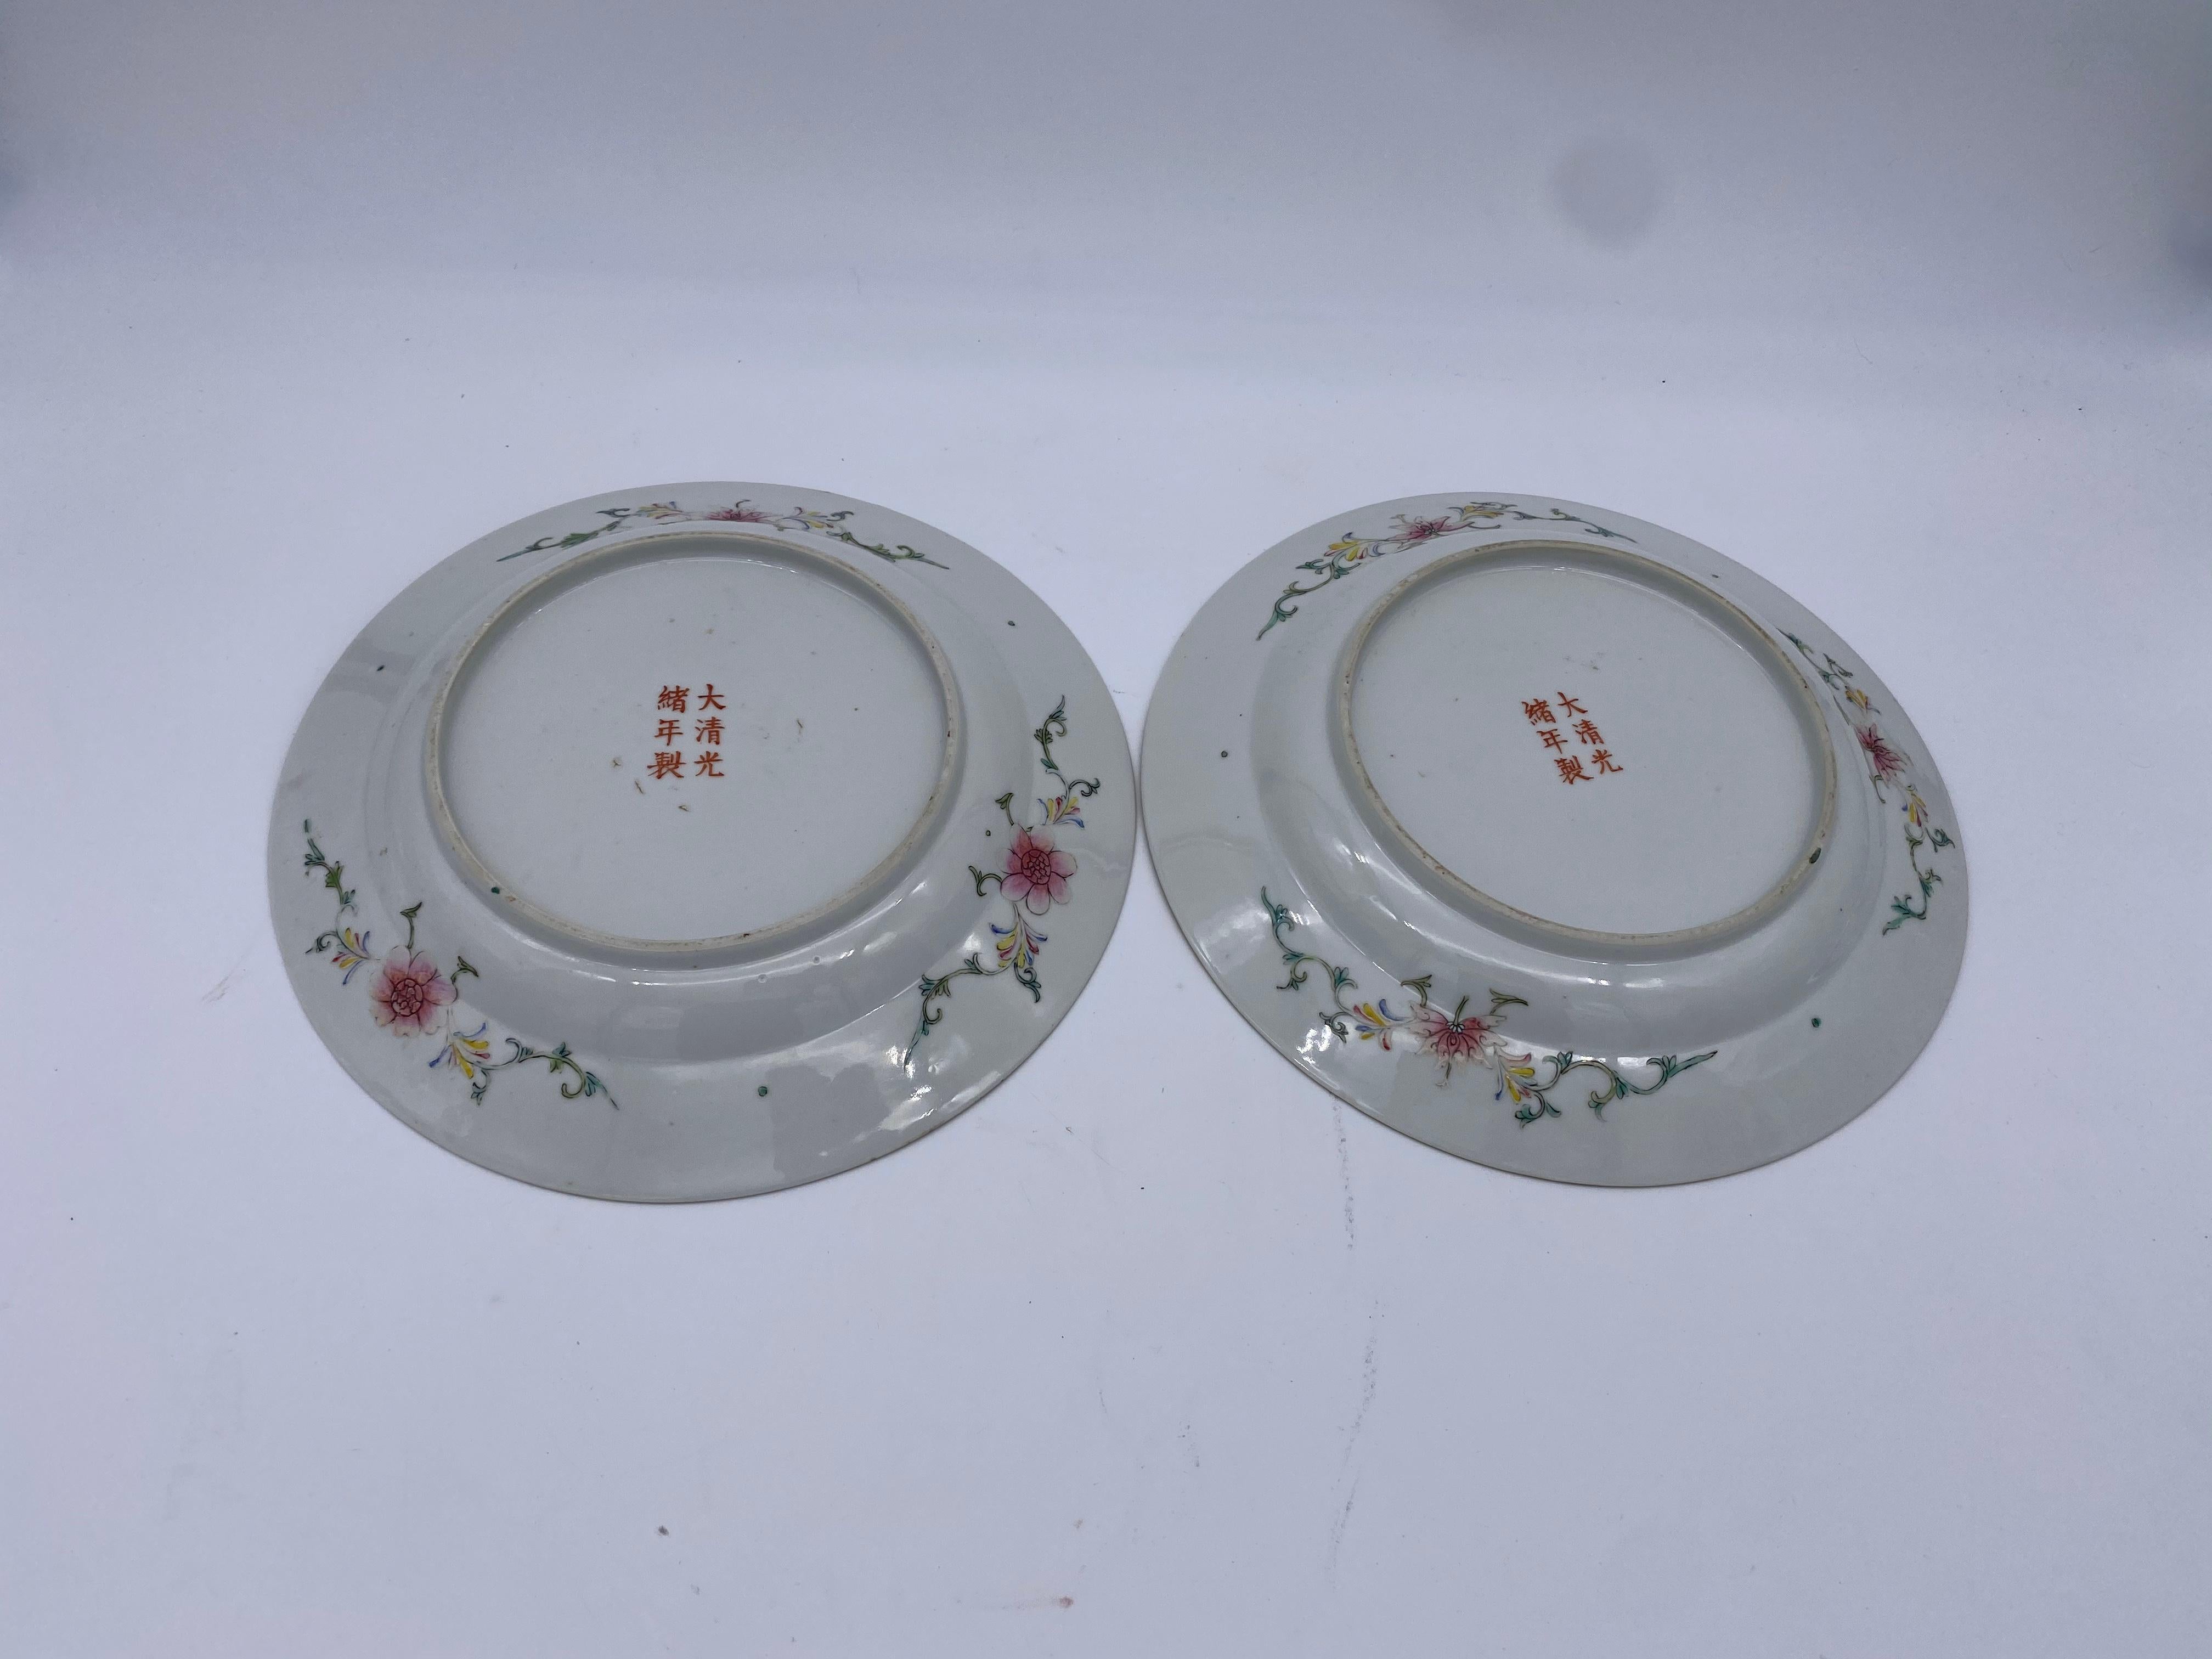 Pair of 19th Century Chinese Flower-Blossom Porcelain Plates For Sale 5